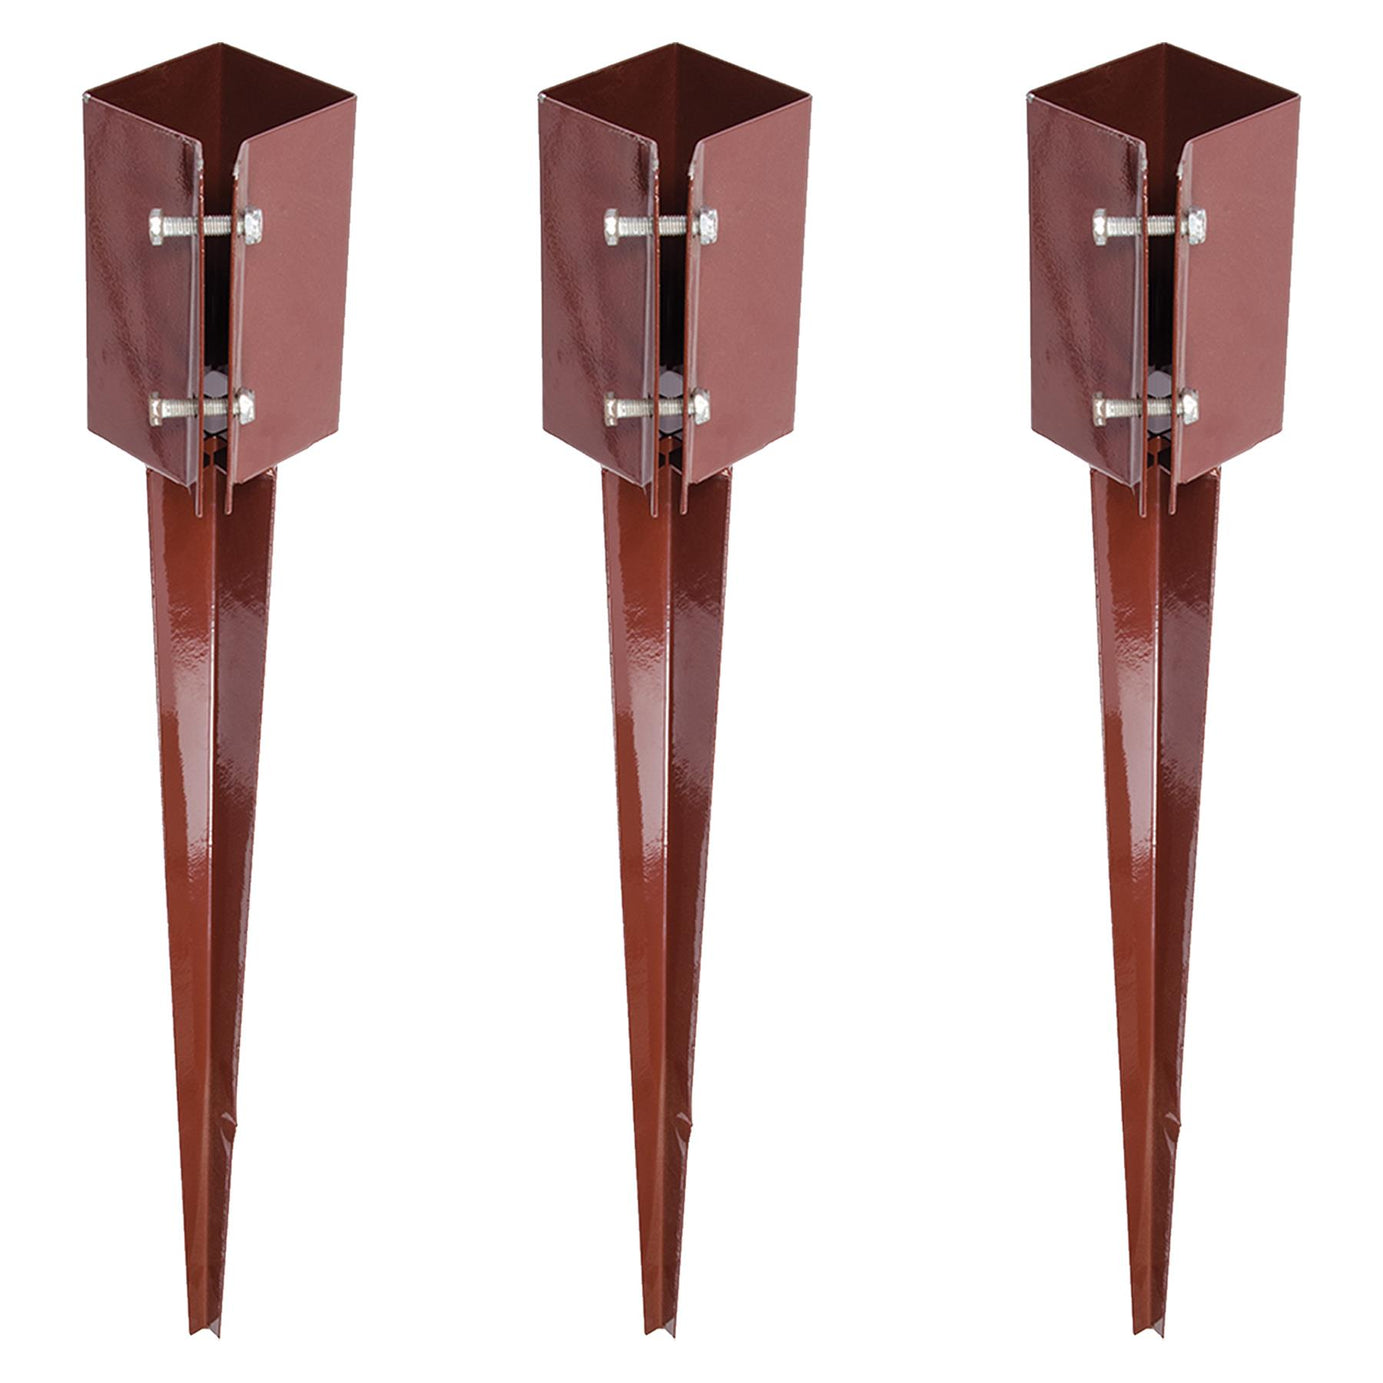 Fence Post Spike Support Holders Drive Down 750mm 3" 75 mm Like Metpost Holder 3PC